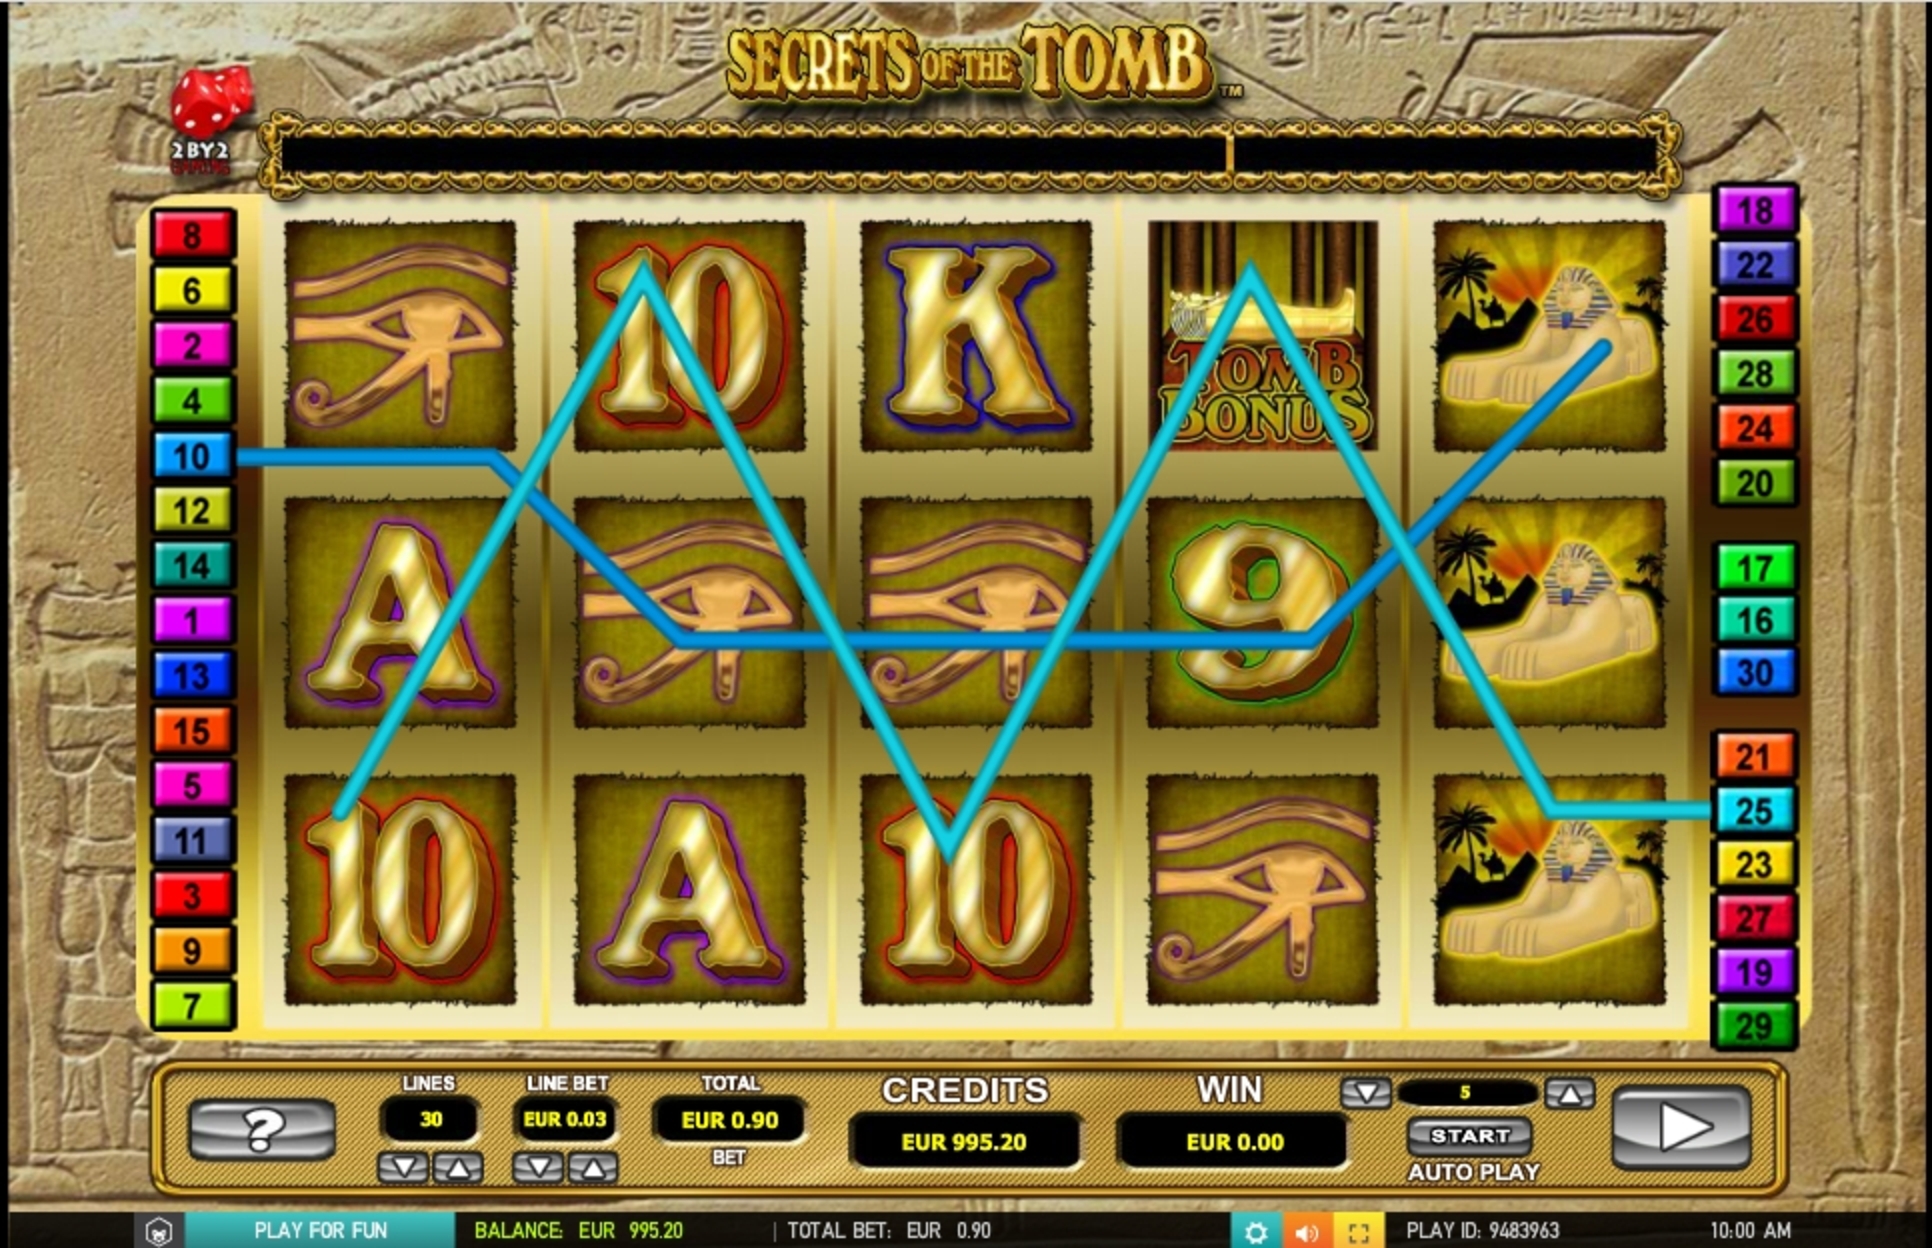 Win Money in Secrets of the tomb Free Slot Game by 2 By 2 Gaming